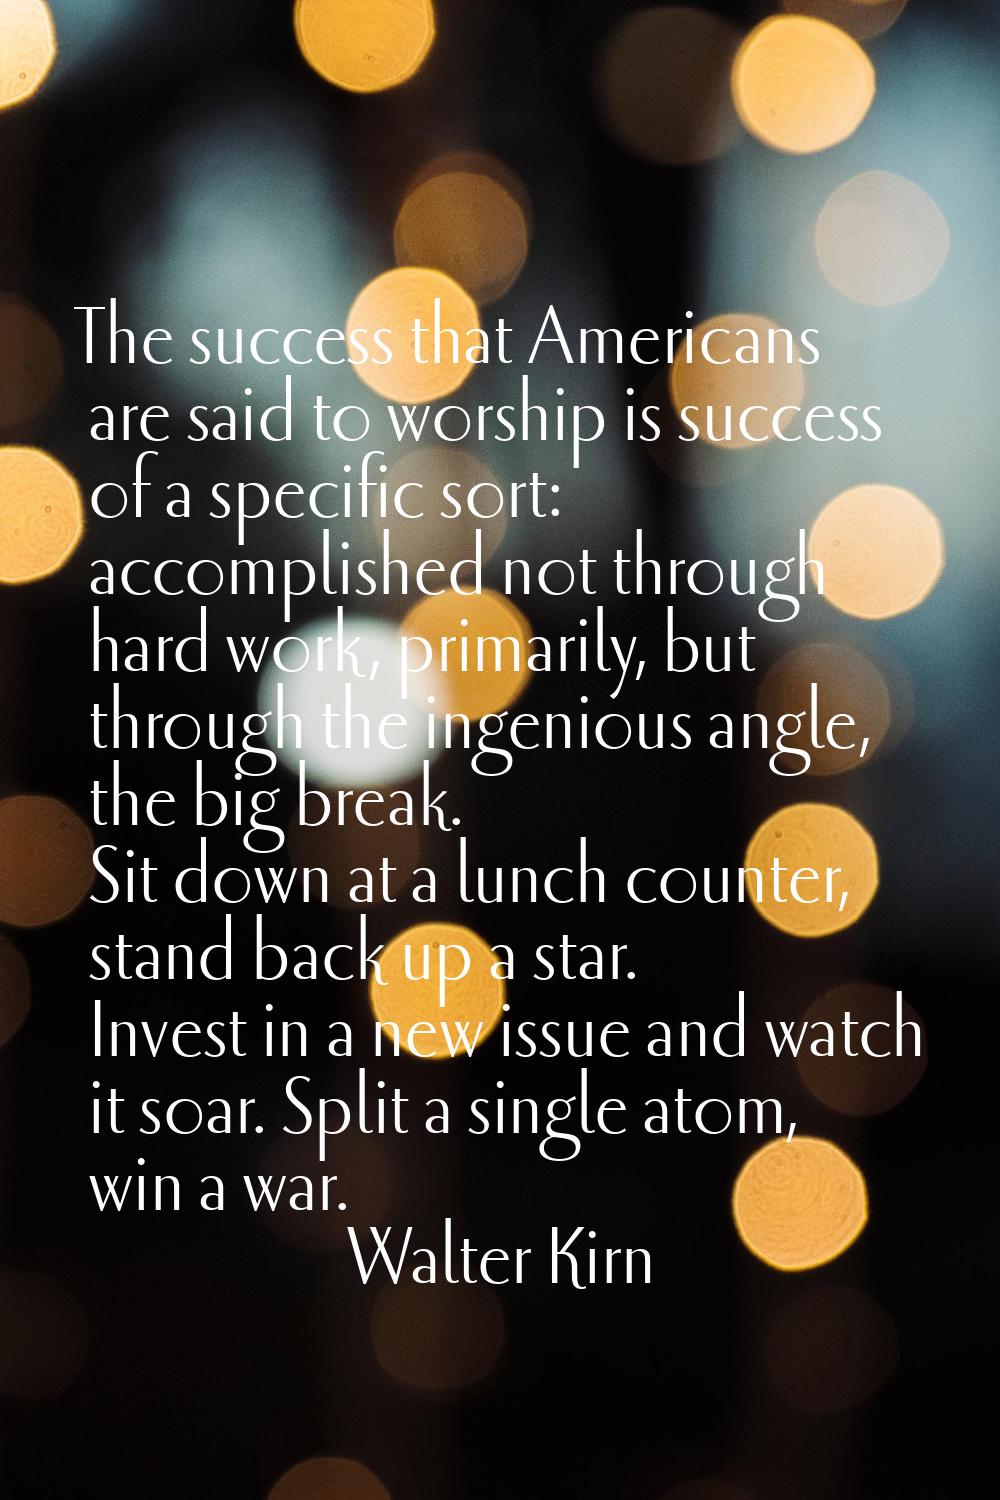 The success that Americans are said to worship is success of a specific sort: accomplished not thro